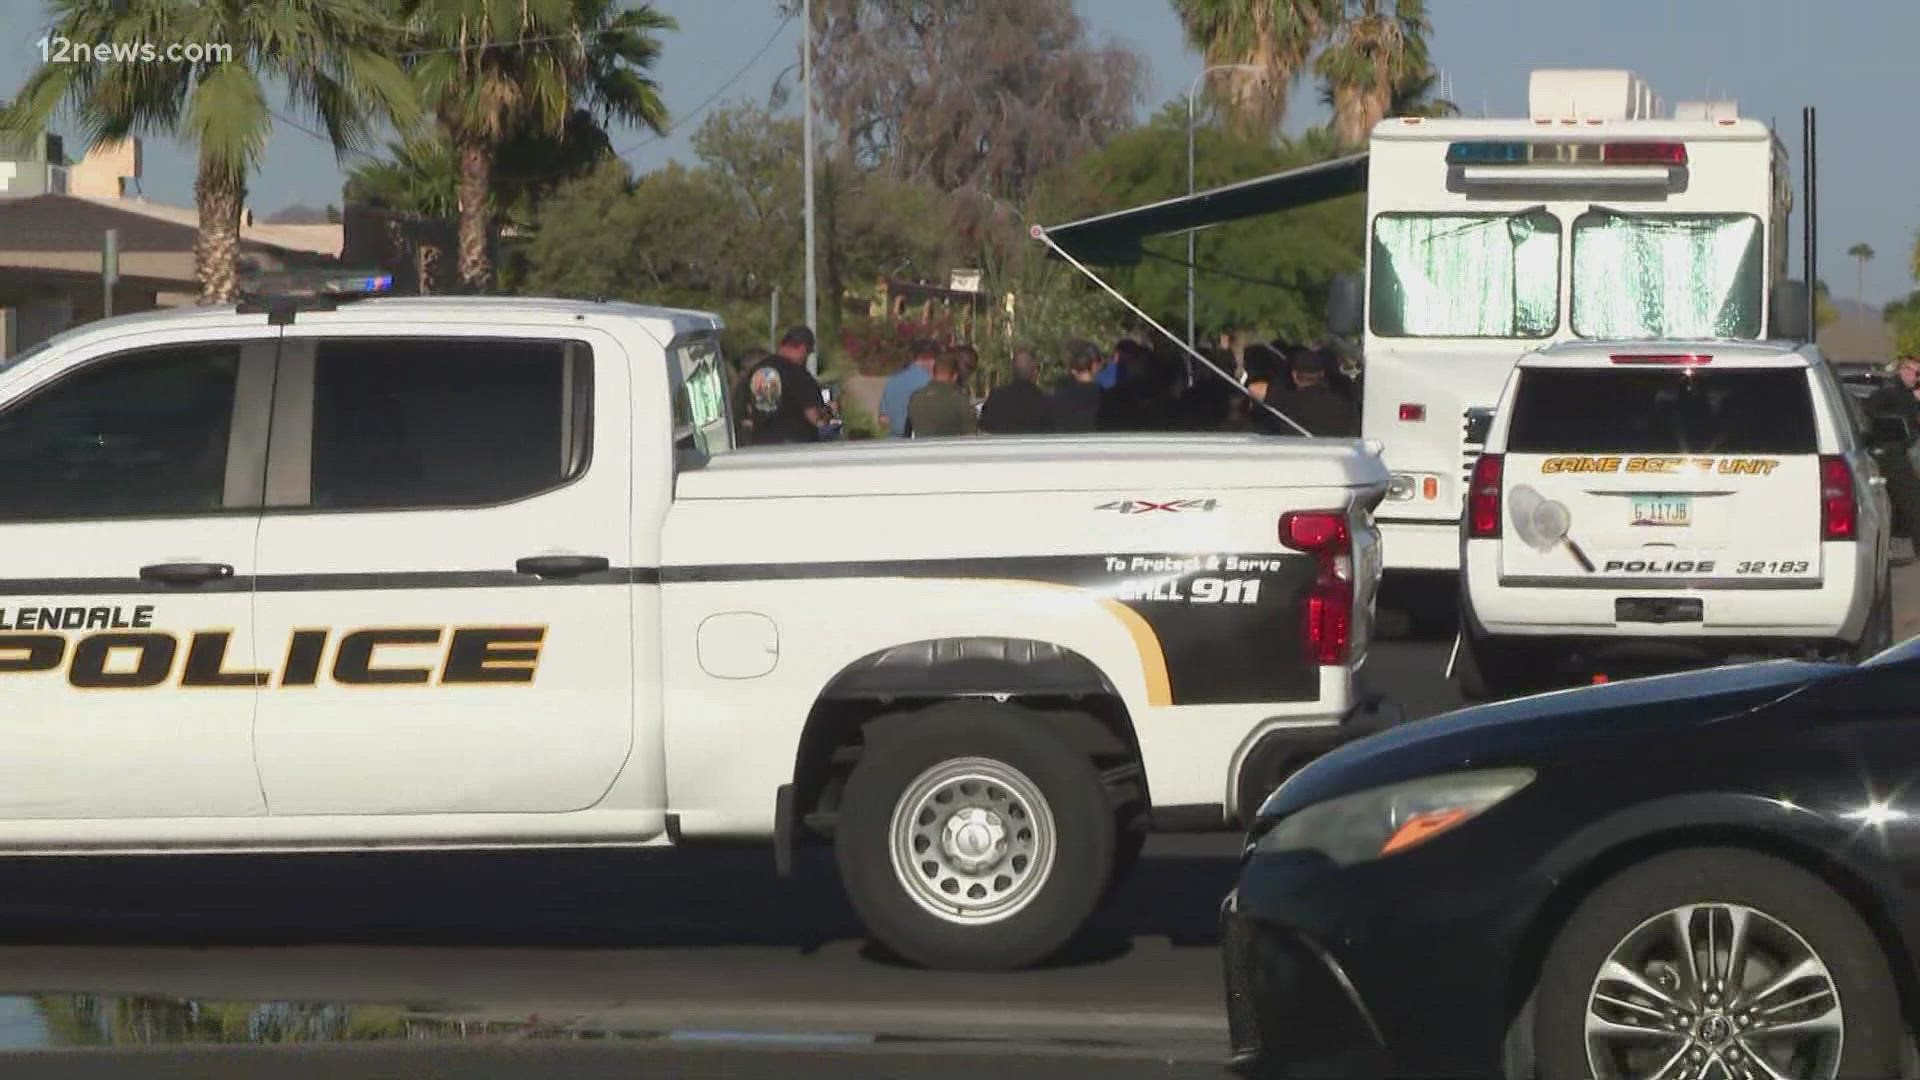 A domestic violence suspect is dead after engaging in a lengthy standoff with Glendale police on Thursday. The officer has non-life threatening injuries.